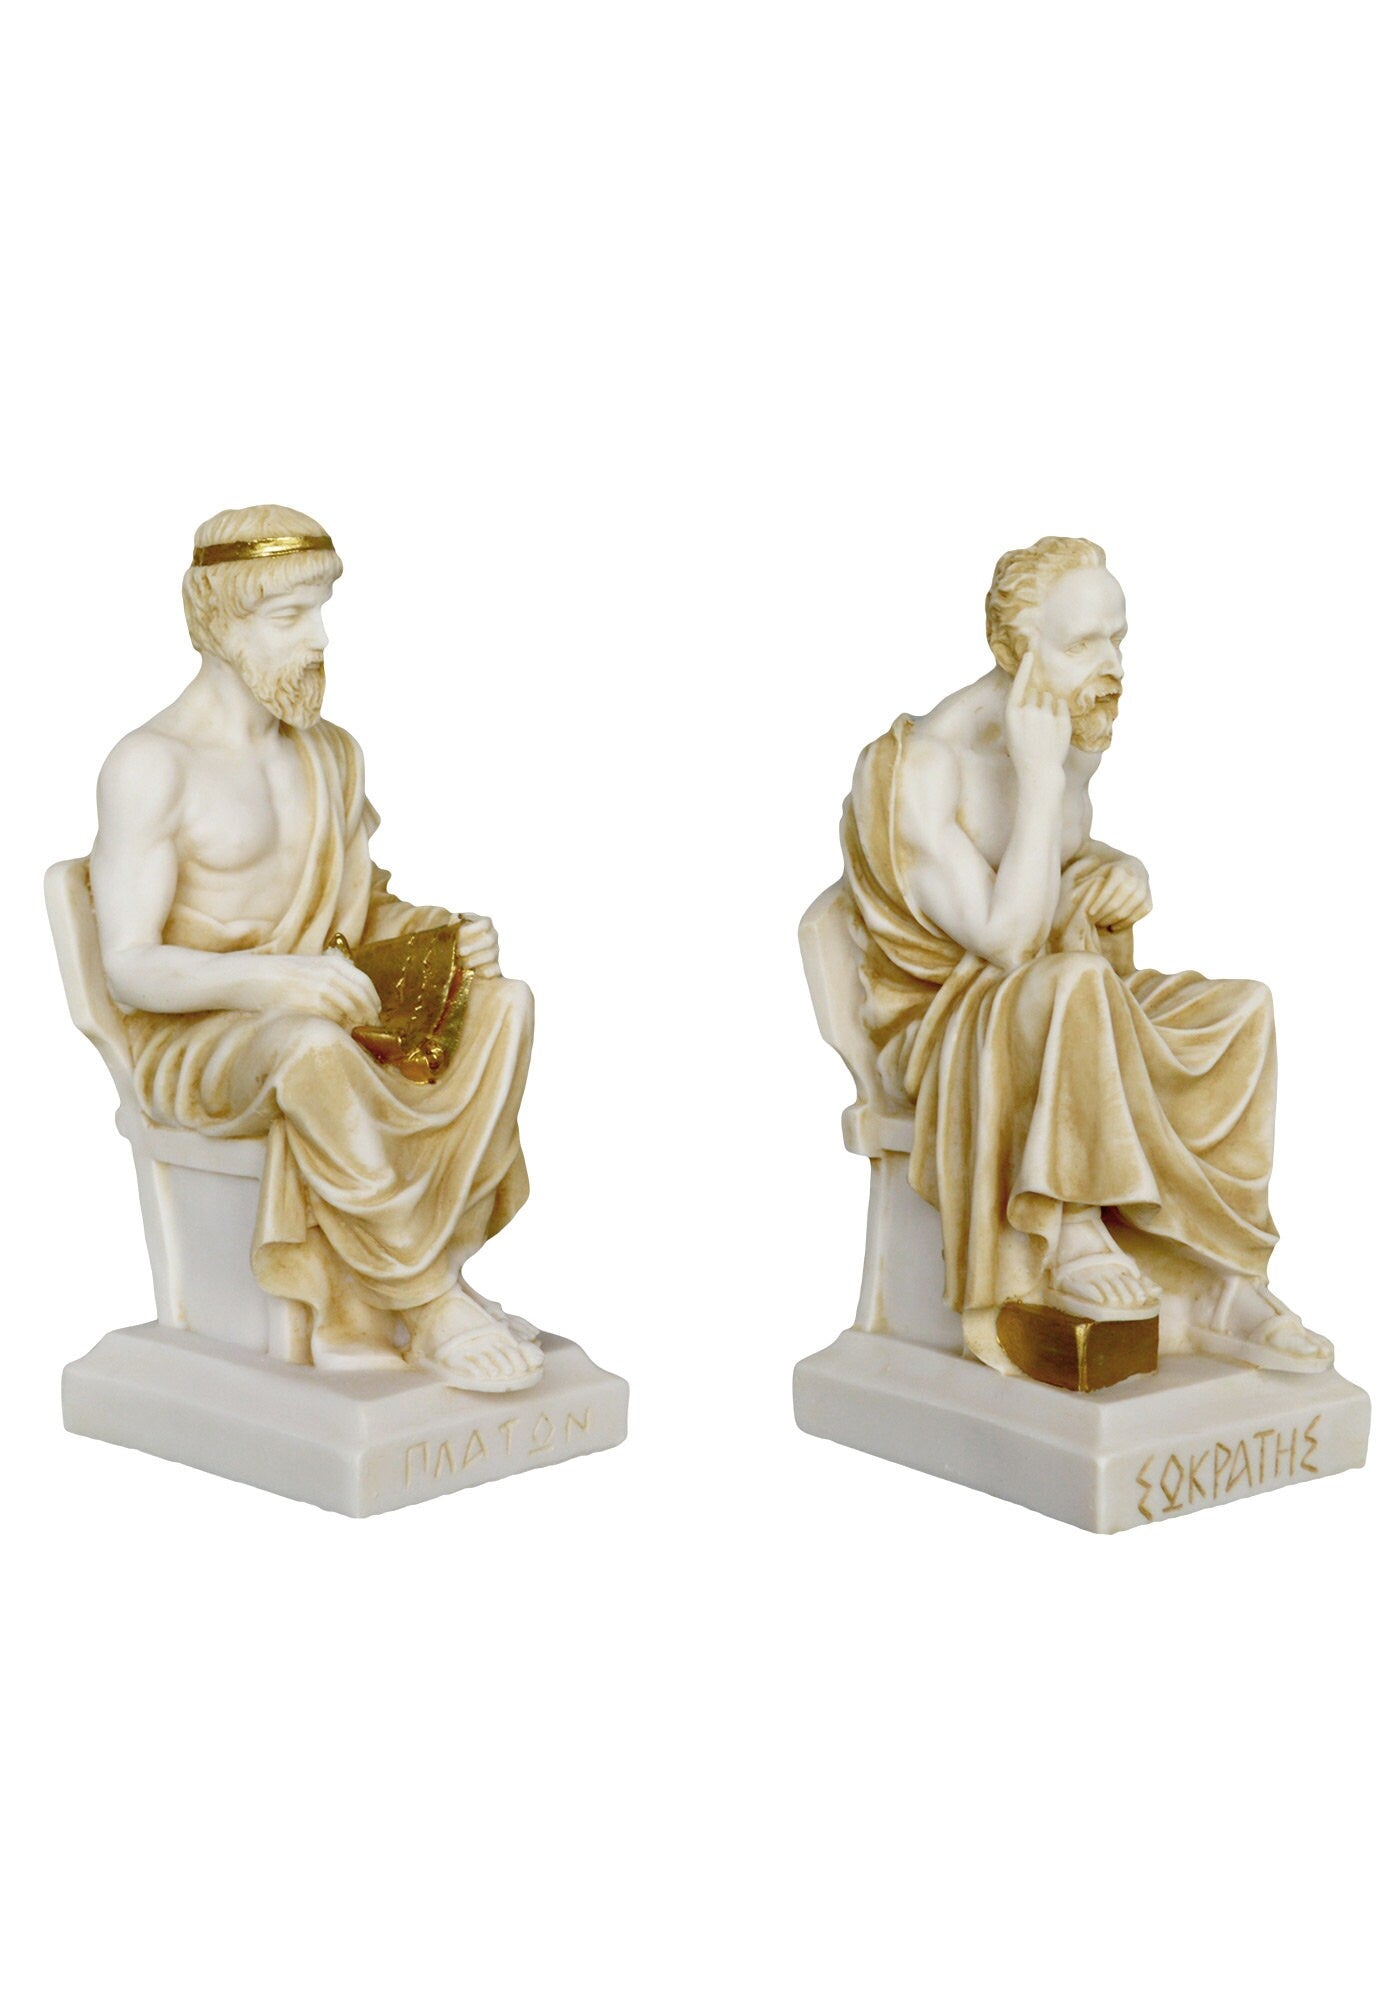 Socrates  and Plato Set - Teacher and Student  - Fathers of Western Philosophy -  Aged Alabaster Sculptures